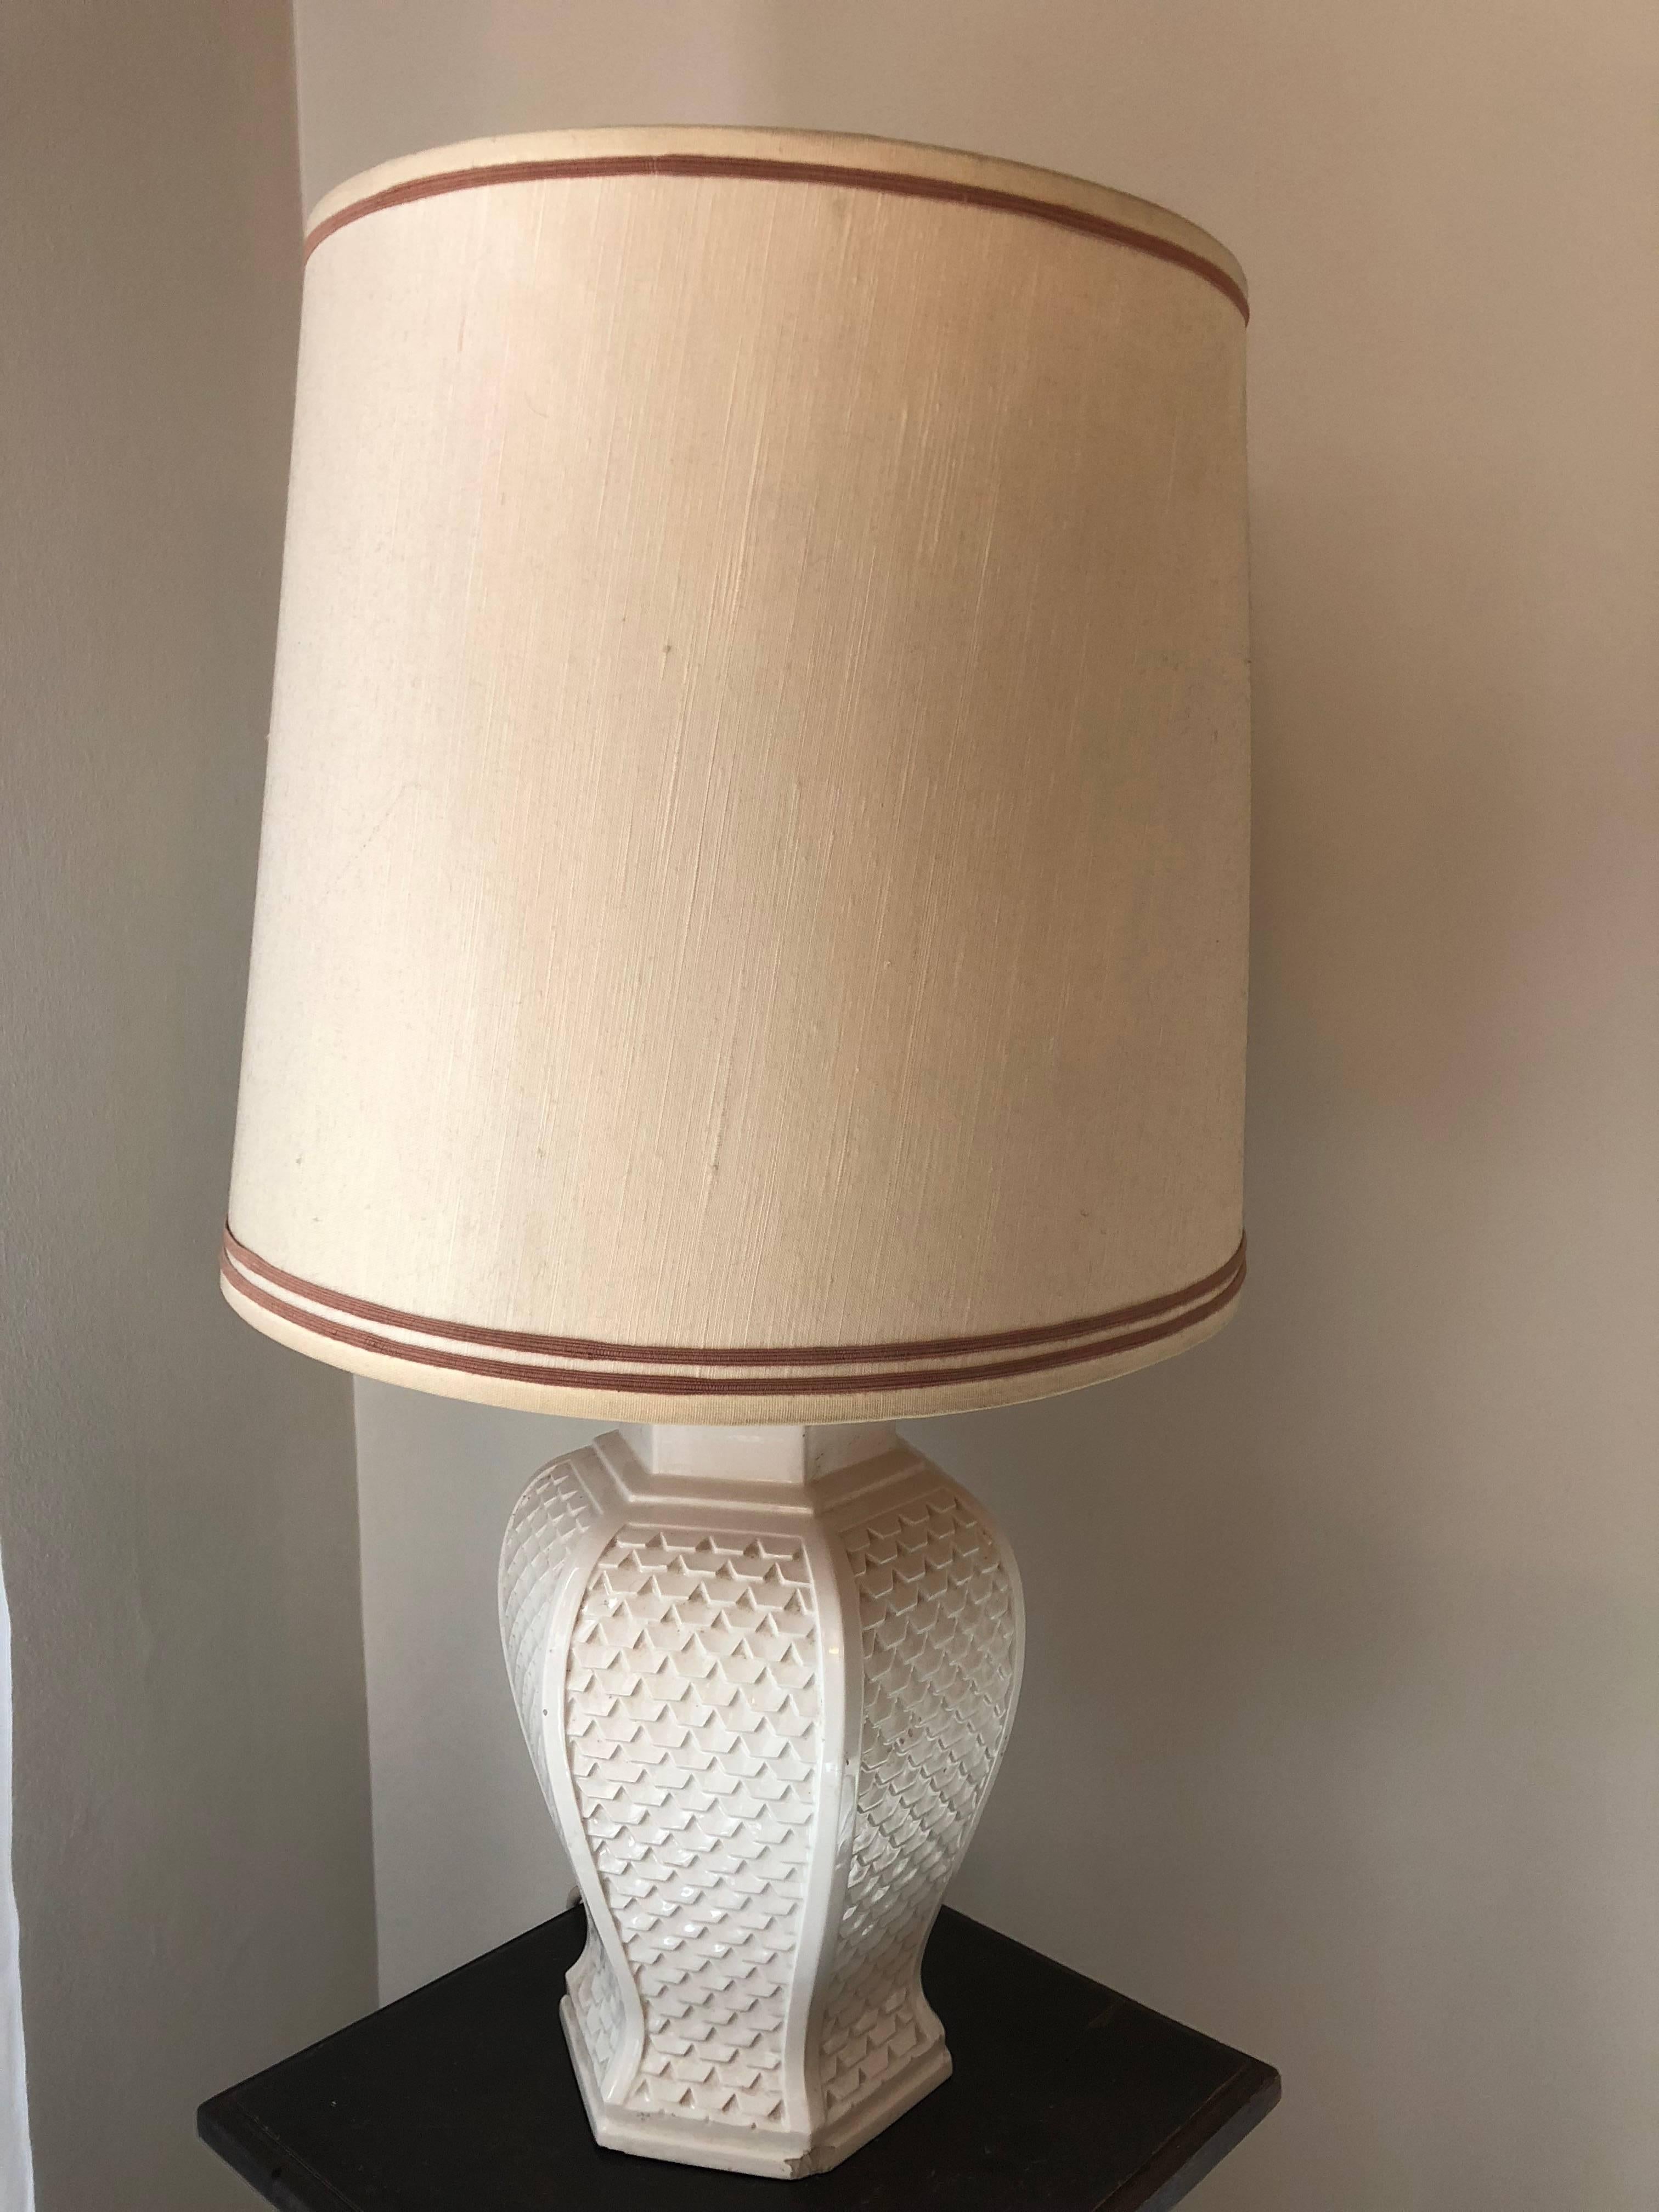 Elegant white ceramic base Stand Italian desk lamp with beige abat-jour.

INTERNATIONAL SHIPPING
Our transportation of antique furniture and items is executed with utmost care and with personal flavour in order pick up or bring your precious